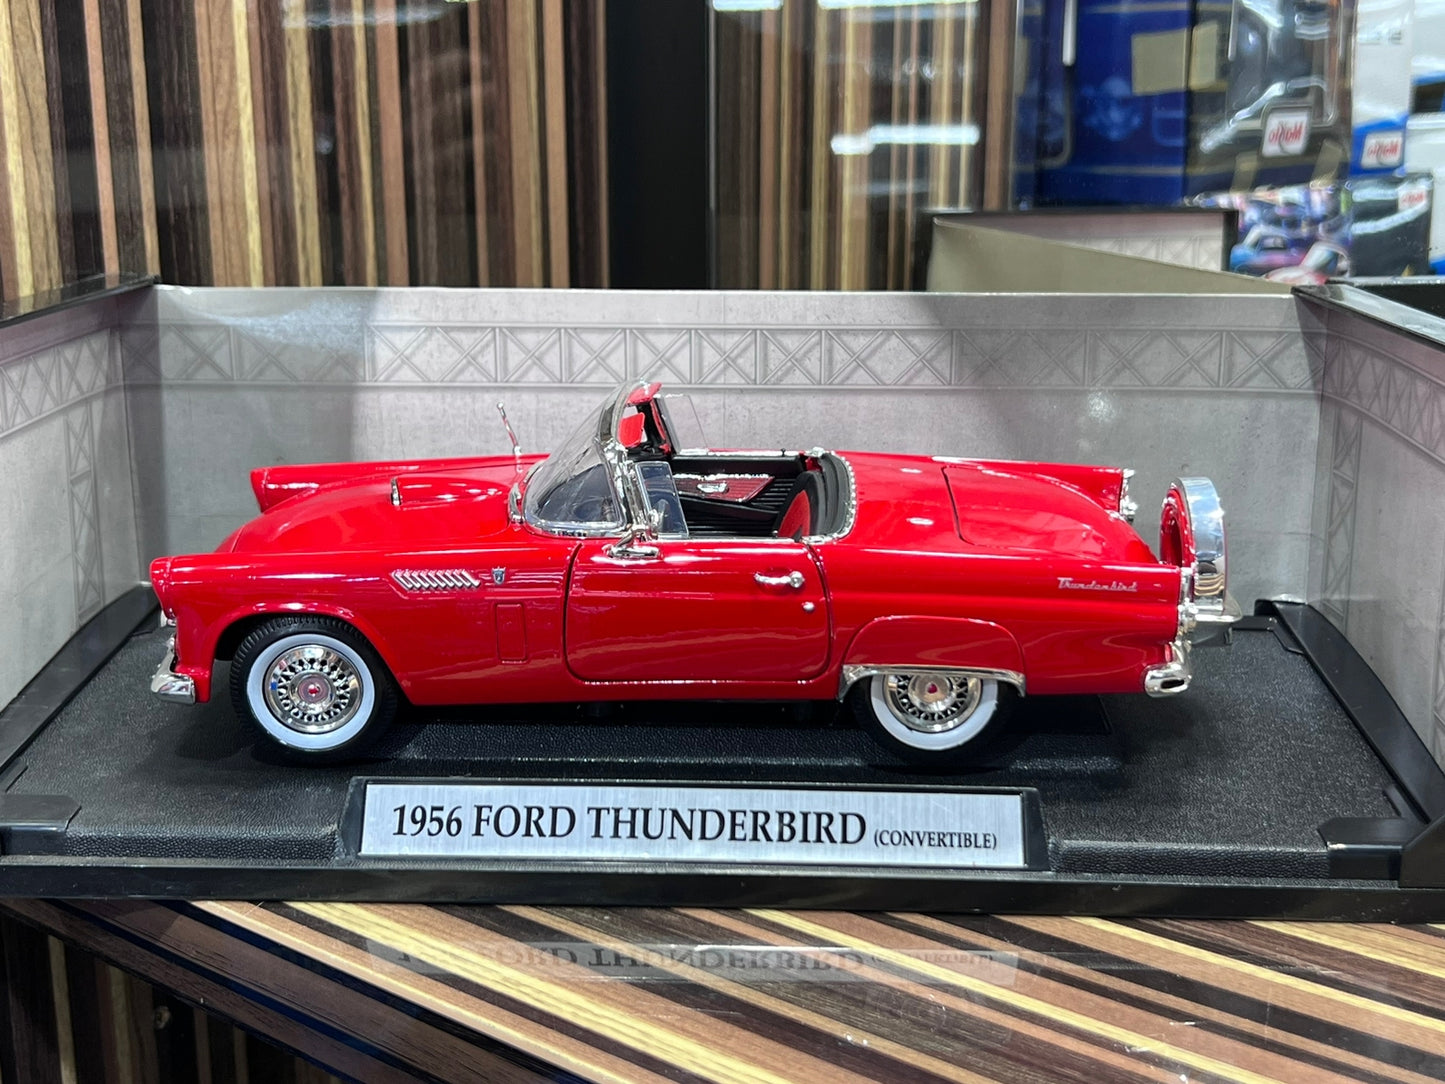 Ford Thunderbird convertible 1956 1/18 by Motormax